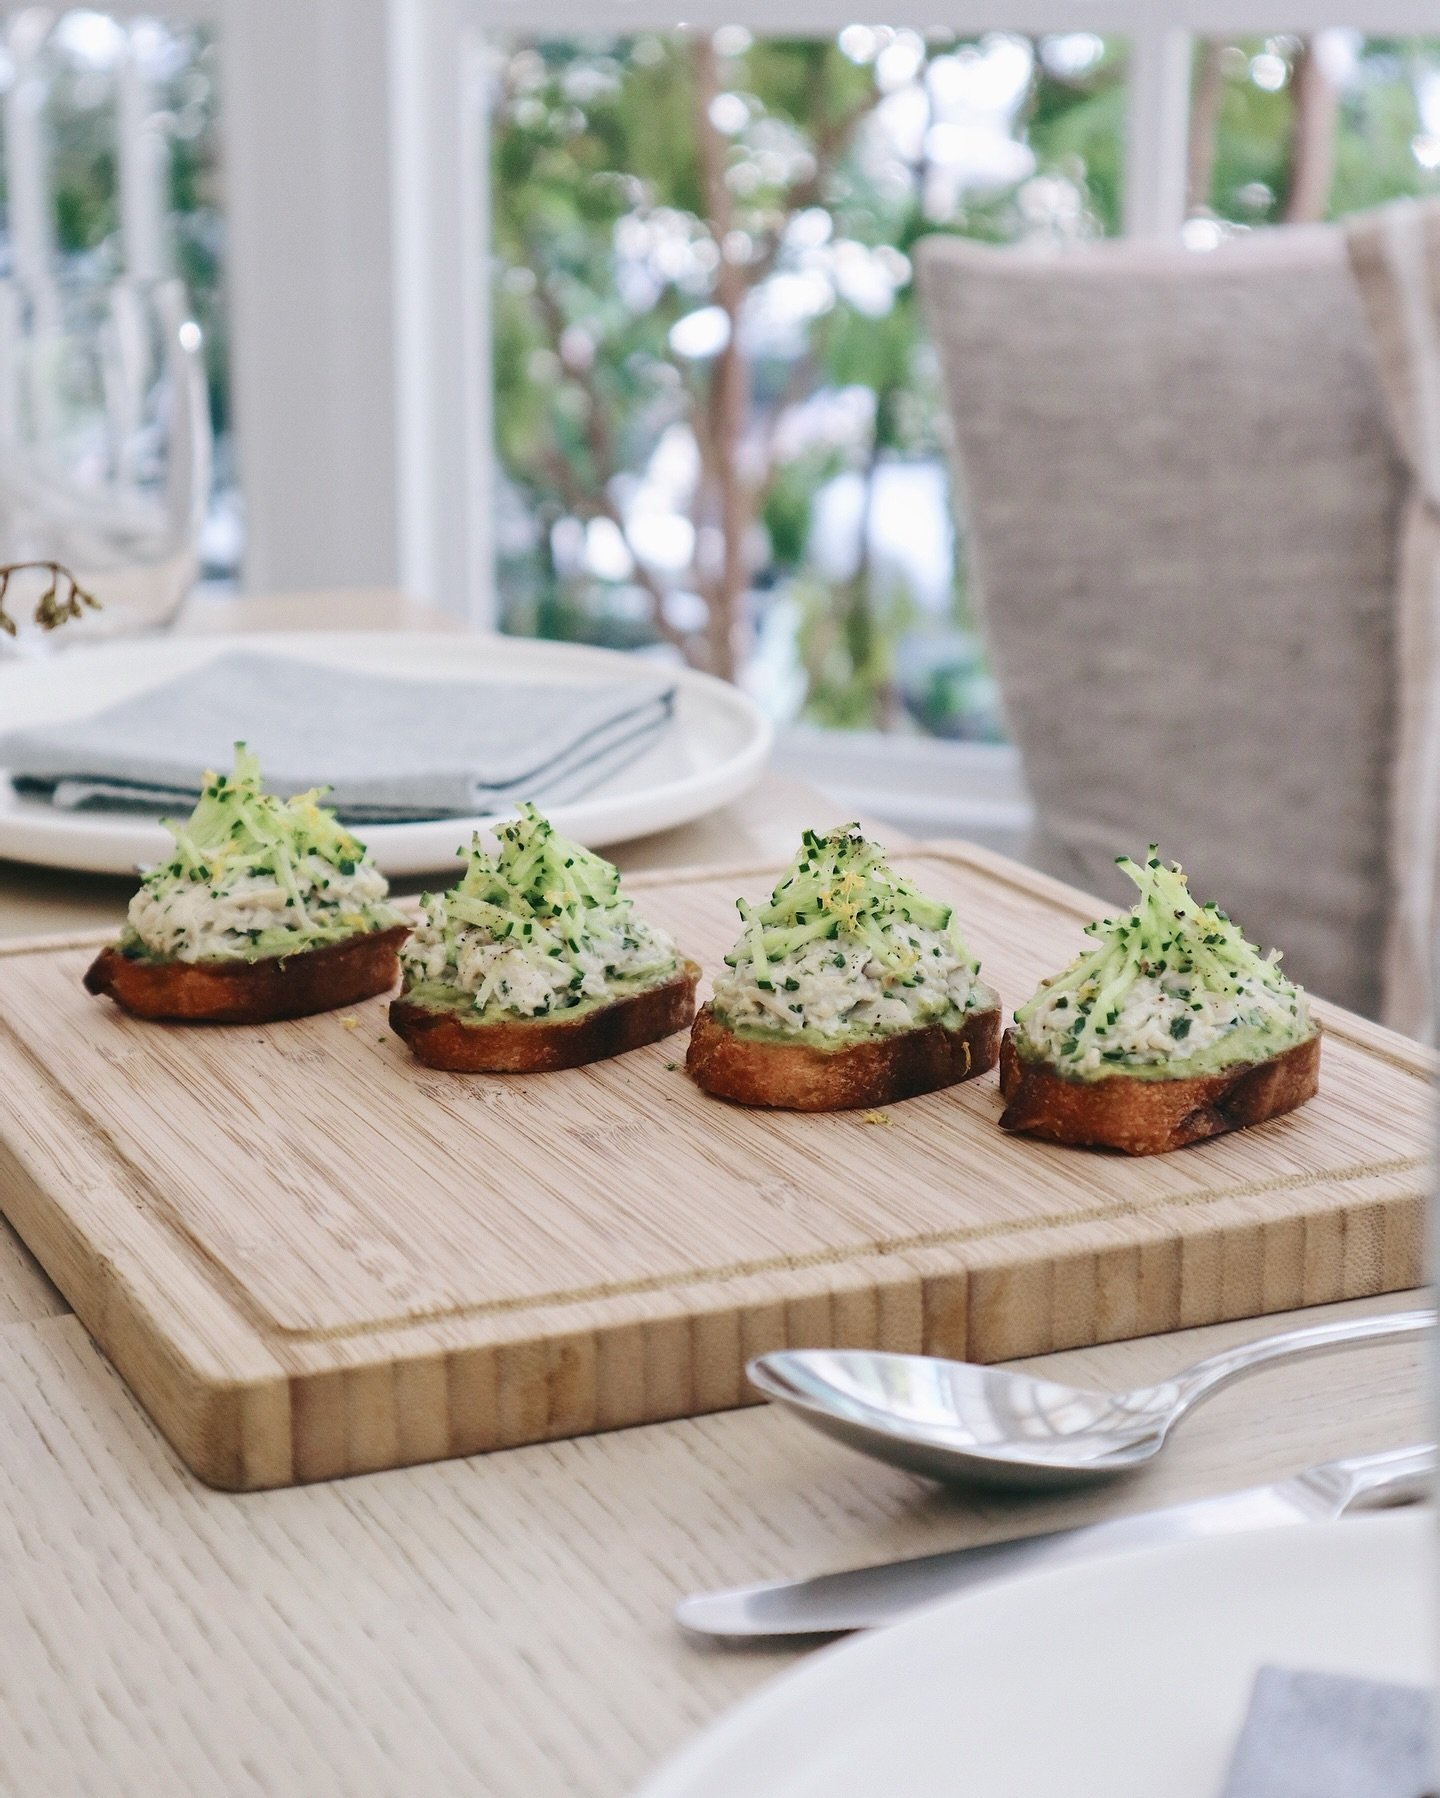 🥑 Avo toast but make it #mini ☀️Happy weekend!! 

#avocadotoast #avotoast #avocado #🥑 #weekendbrunch #sundaybrunch #taipeibrunch #早午餐 #台北早午餐 #台北早午餐推薦 
#信義安和早午餐 #大安區早午餐 #alldaybrunch #healthybrunch #healthyfood #healthiswealth